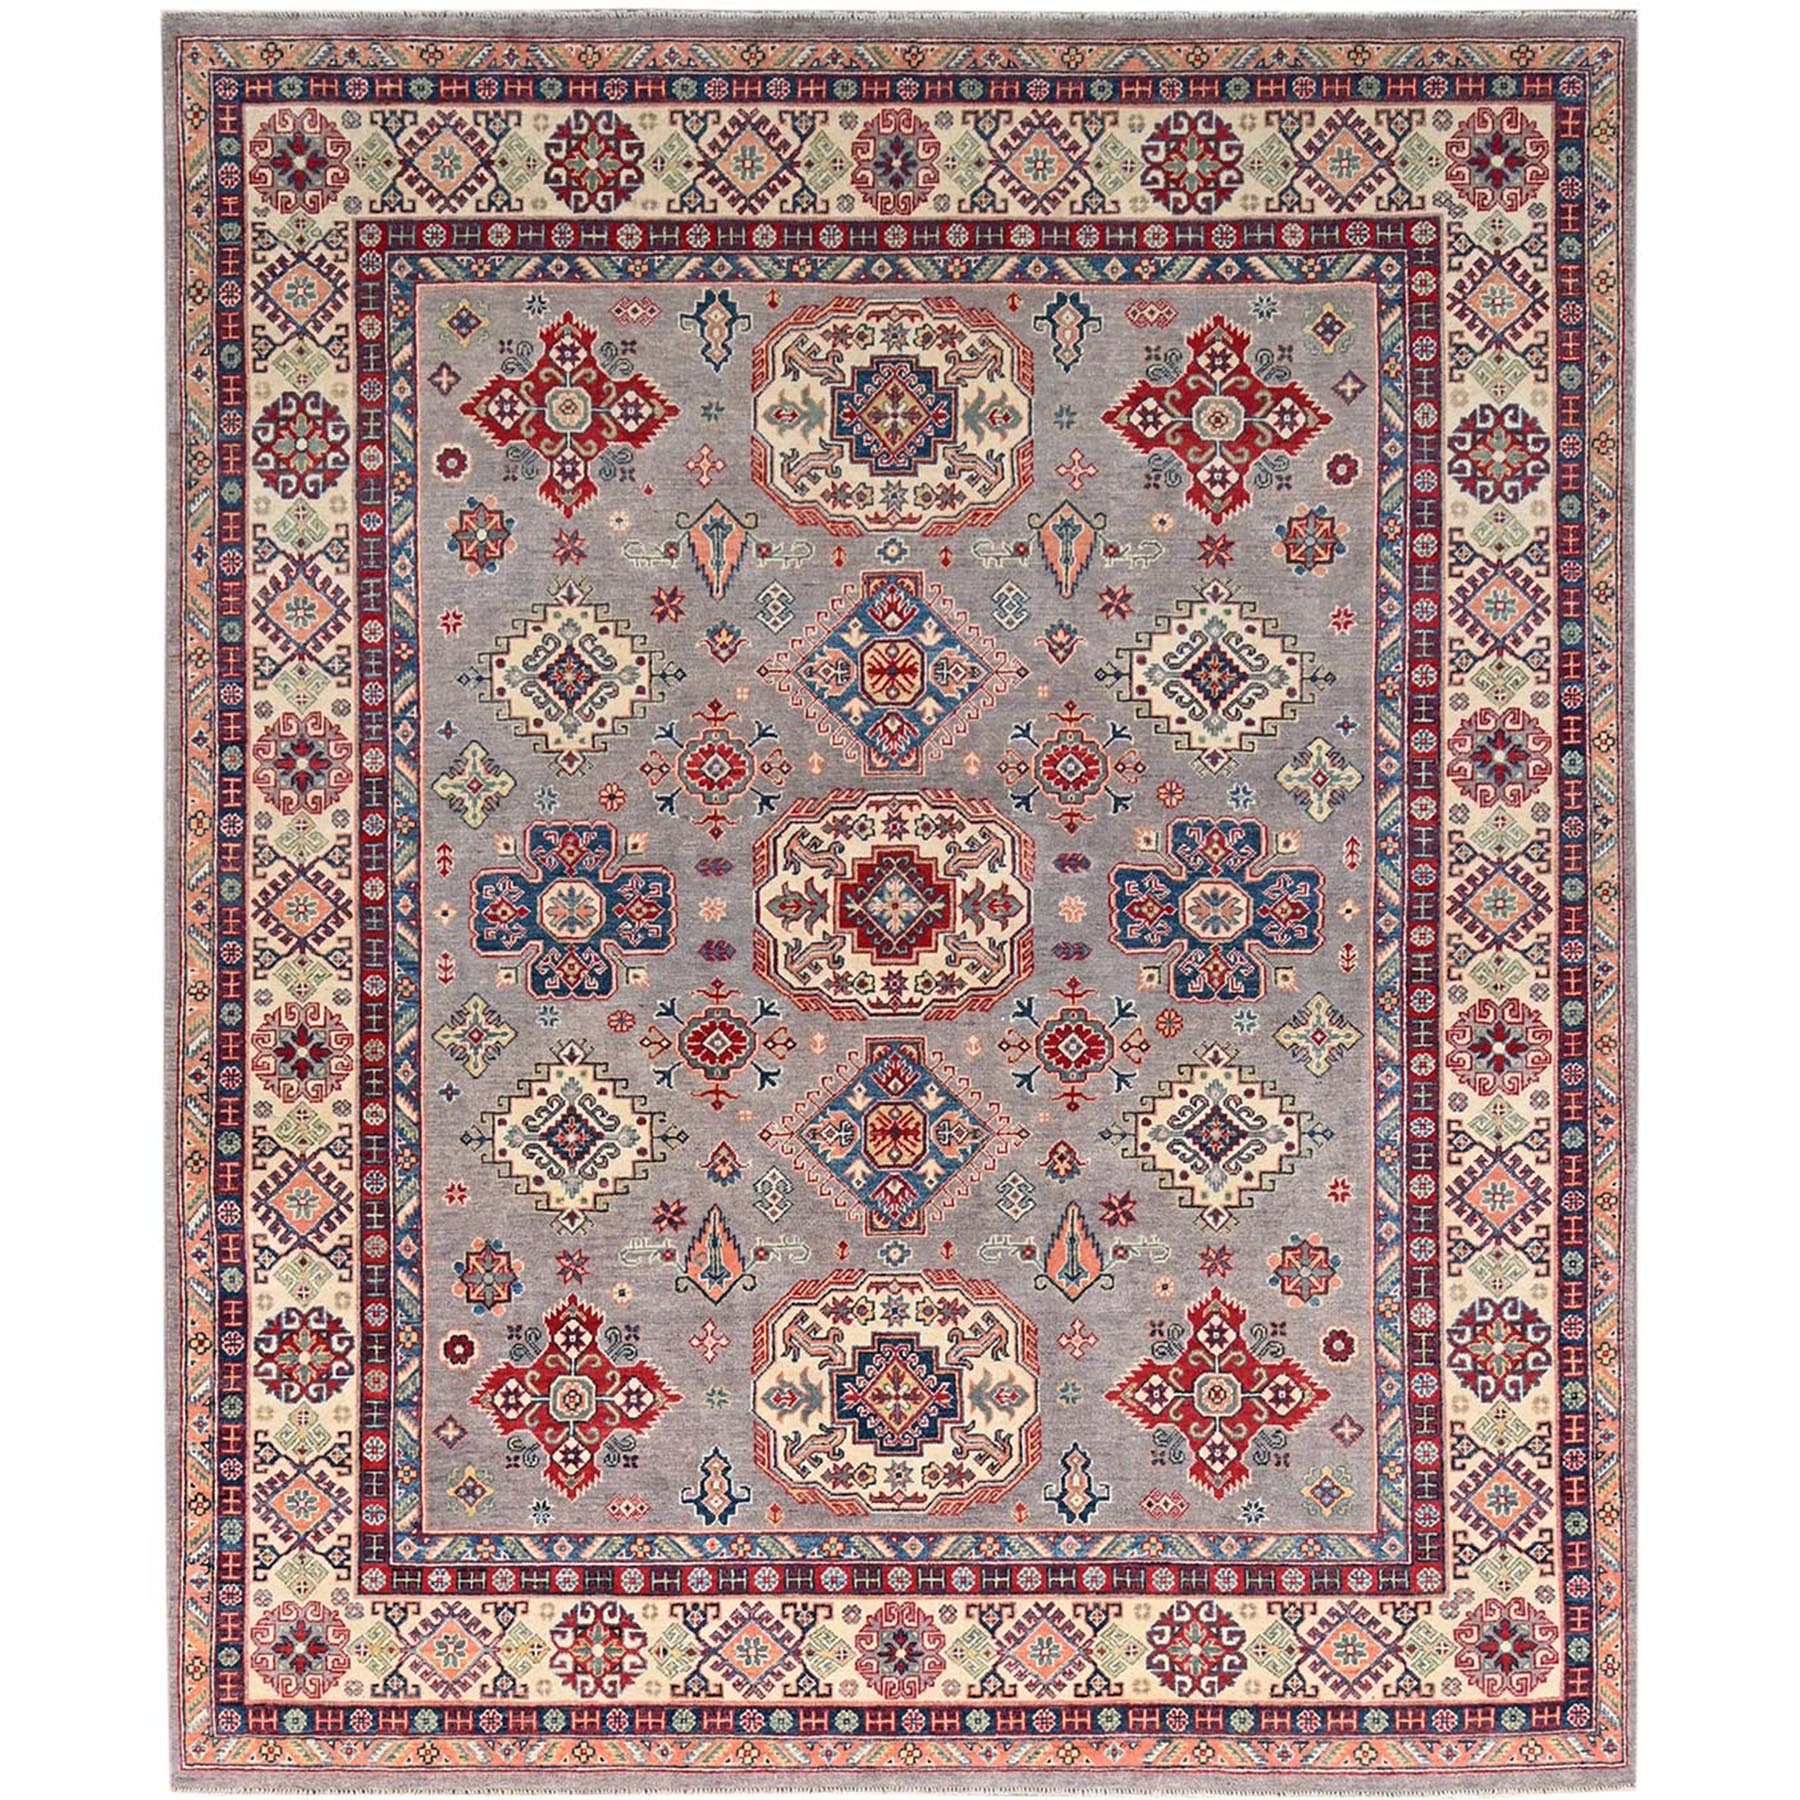 Functional Gray Hand Knotted Densely Woven Kazak, Tribal Medallion Design 100% Wool, Vegetable Dyes, Oriental Rug